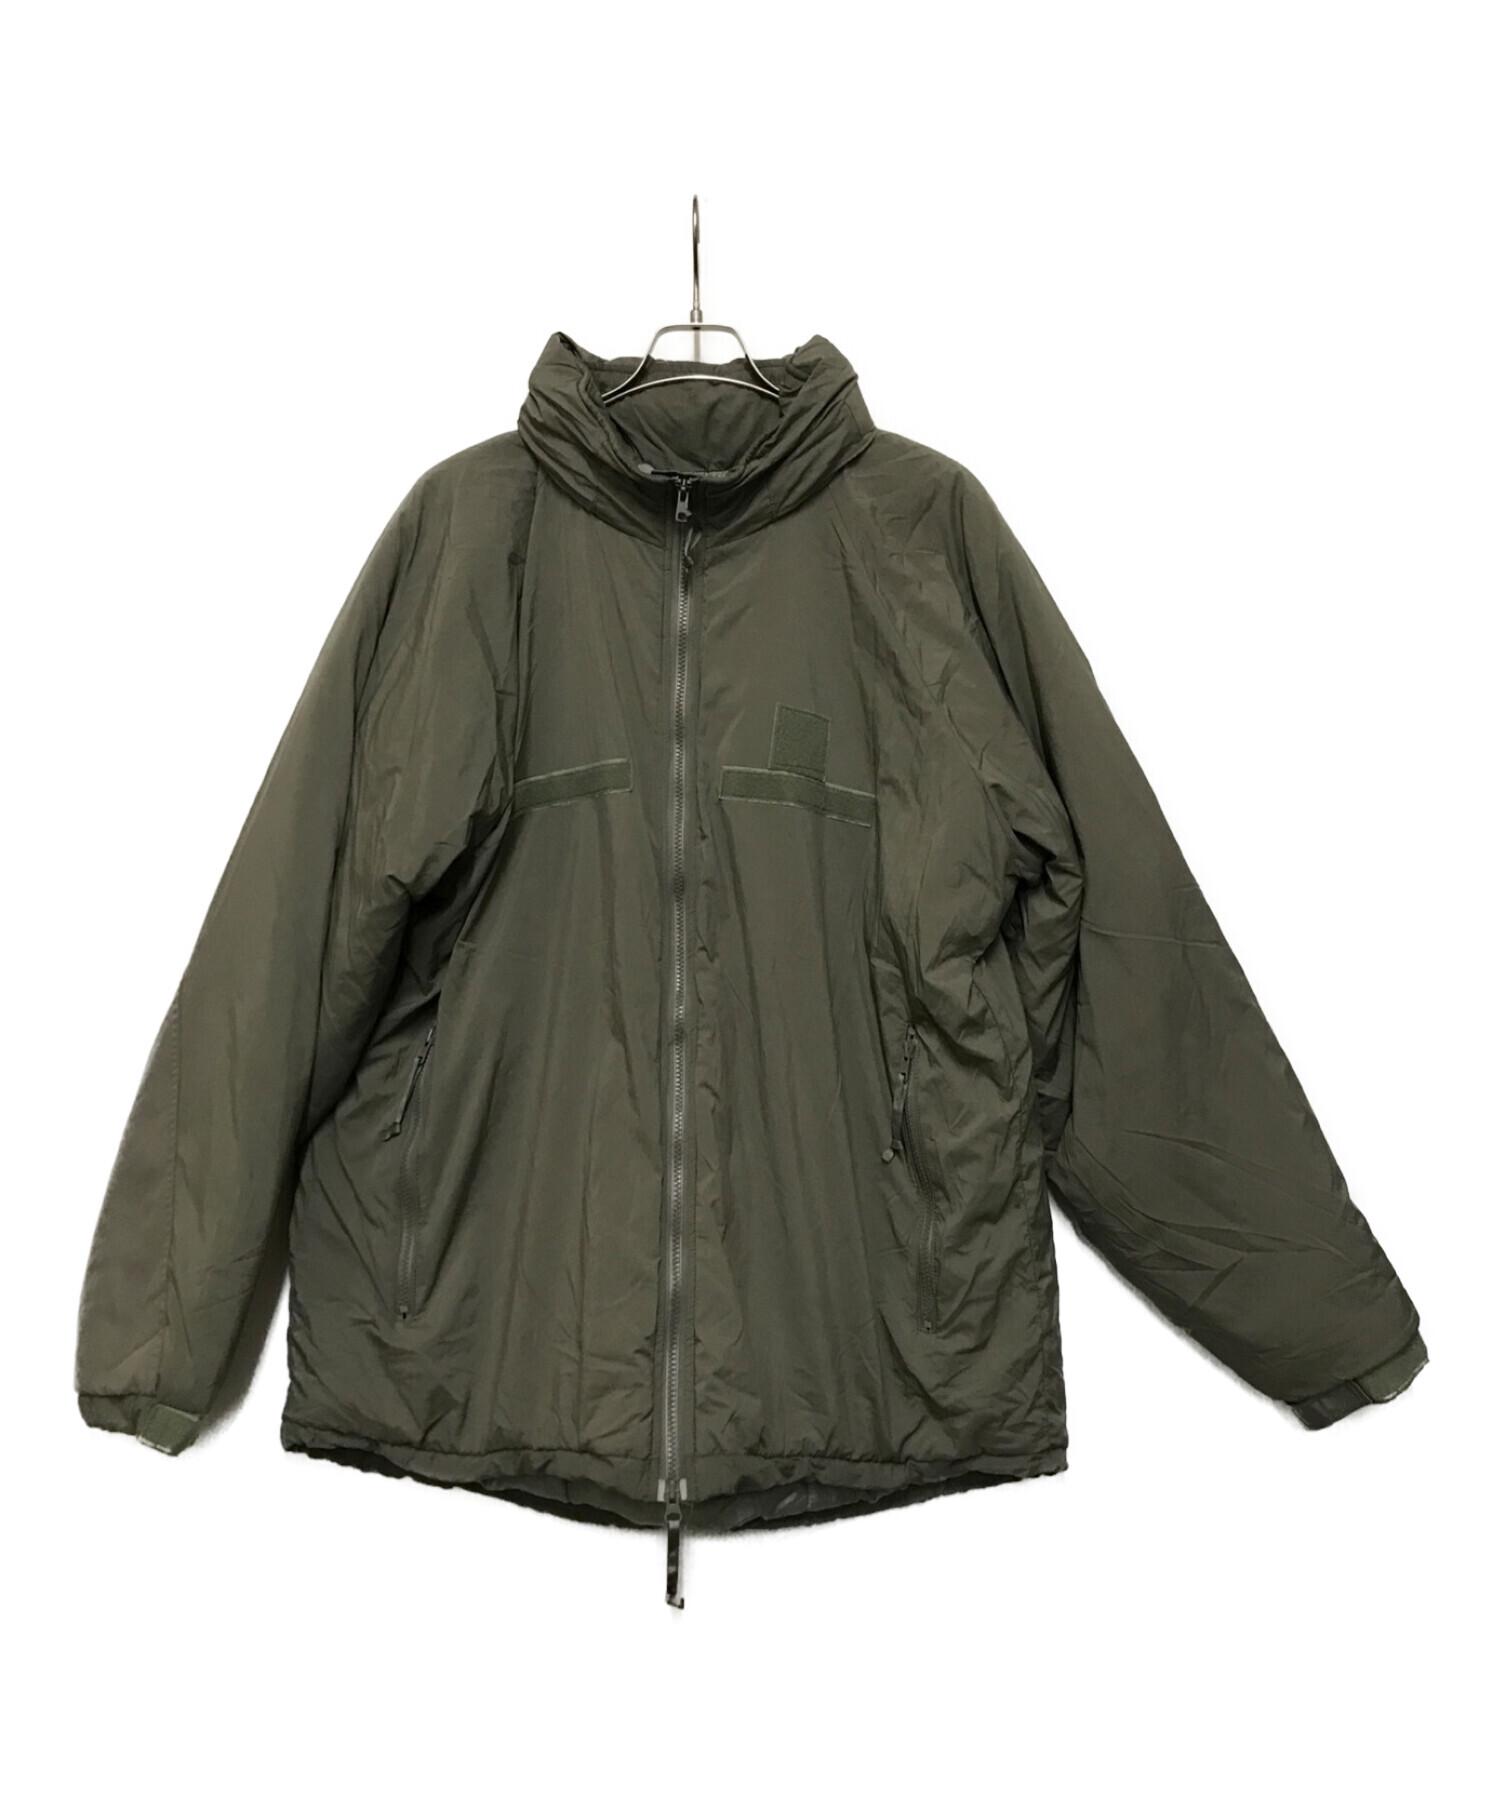 US ARMY (ユーエス アーミー) GEN3 LEVEL7 EXTREME COLD WEATHER PARKA オリーブ サイズ:L